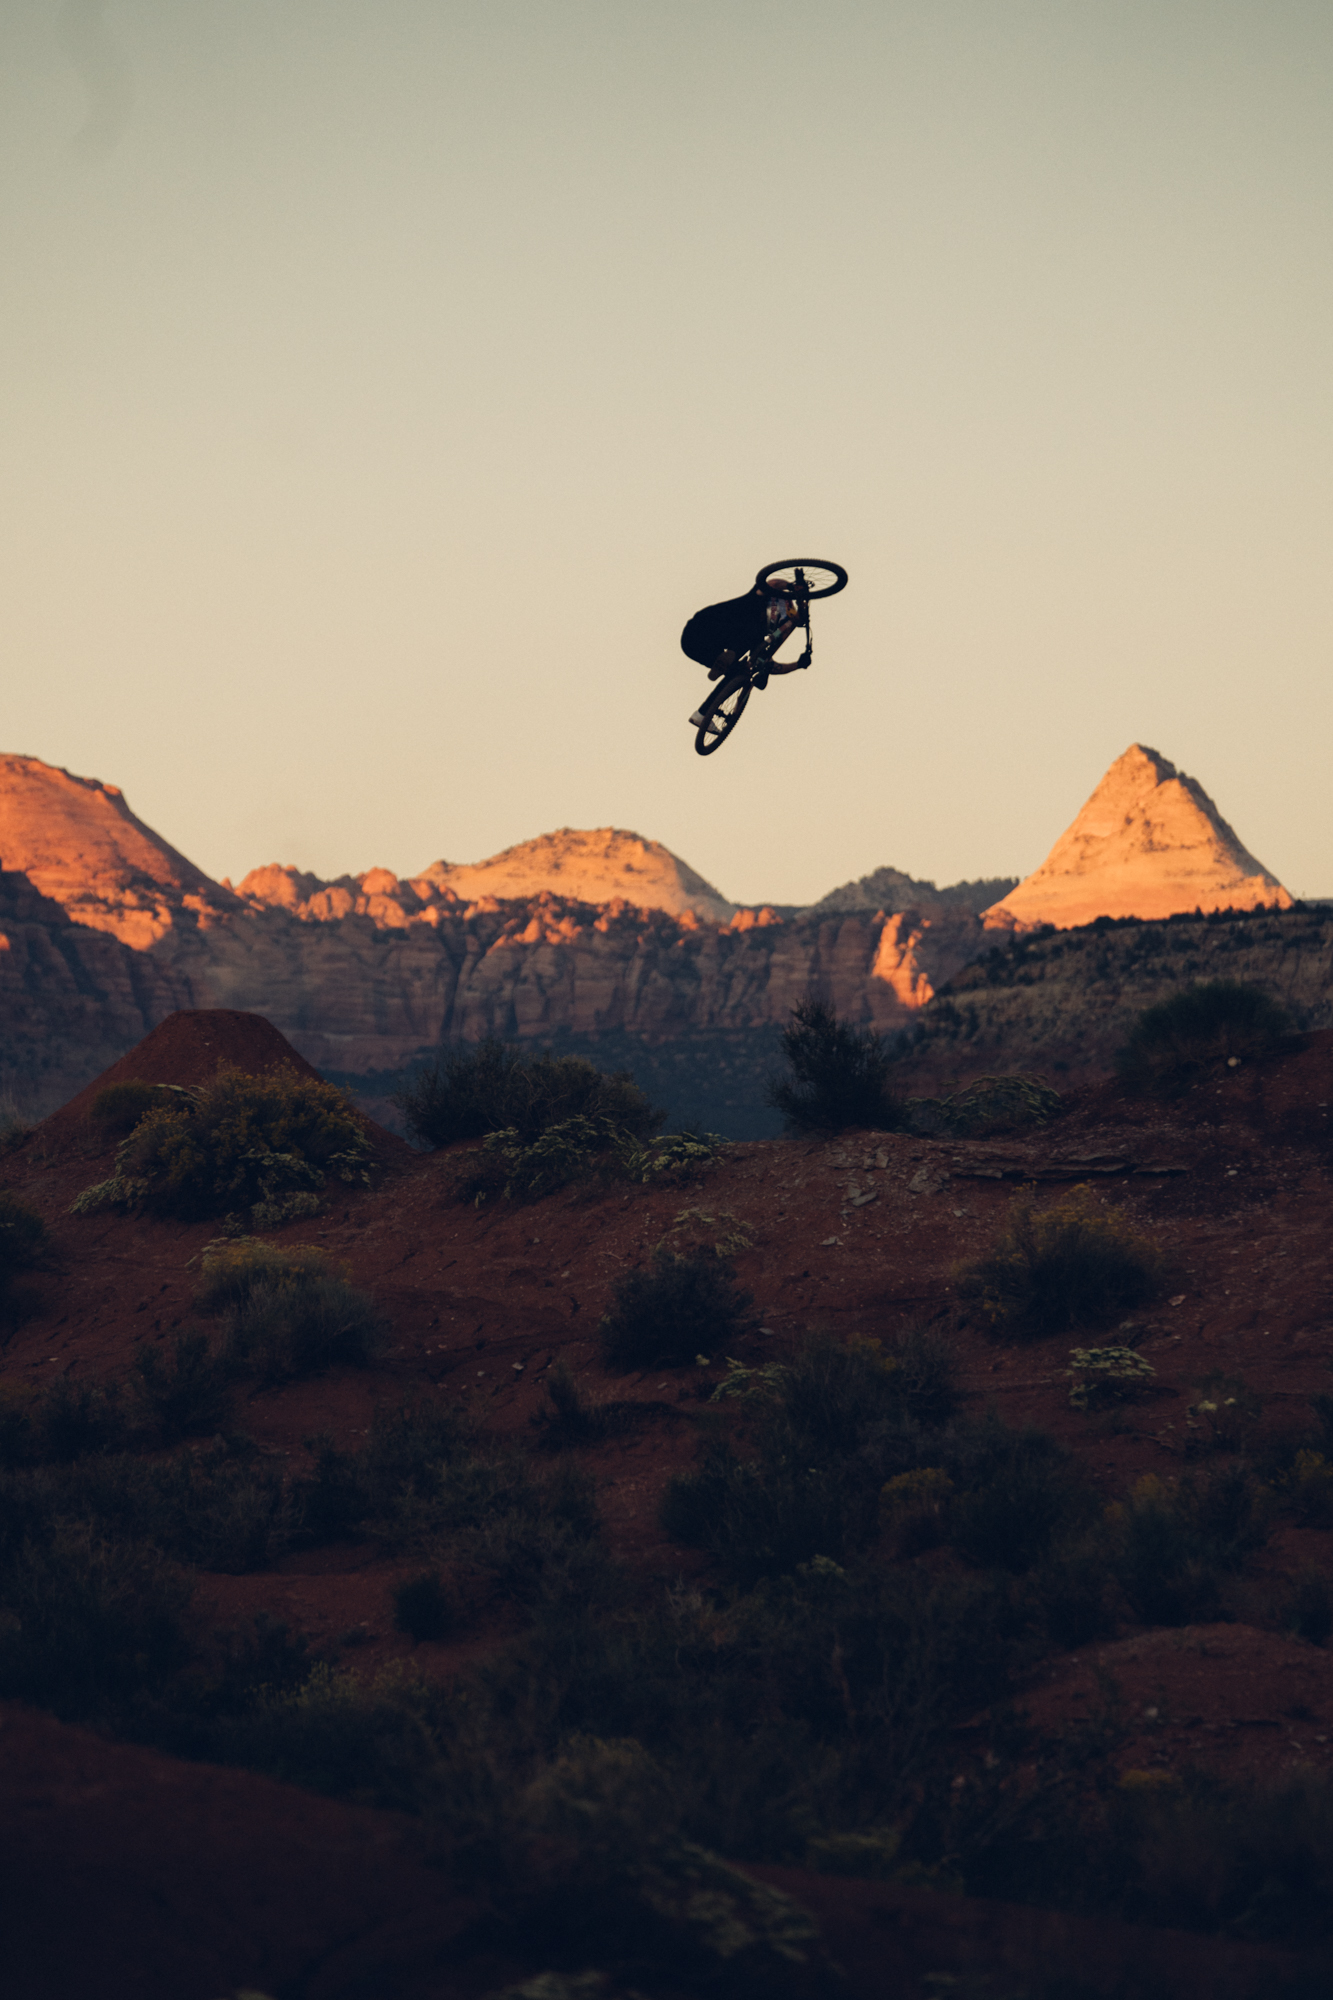 Red Bull Rampage – Tommy G : “Go big or go home!”